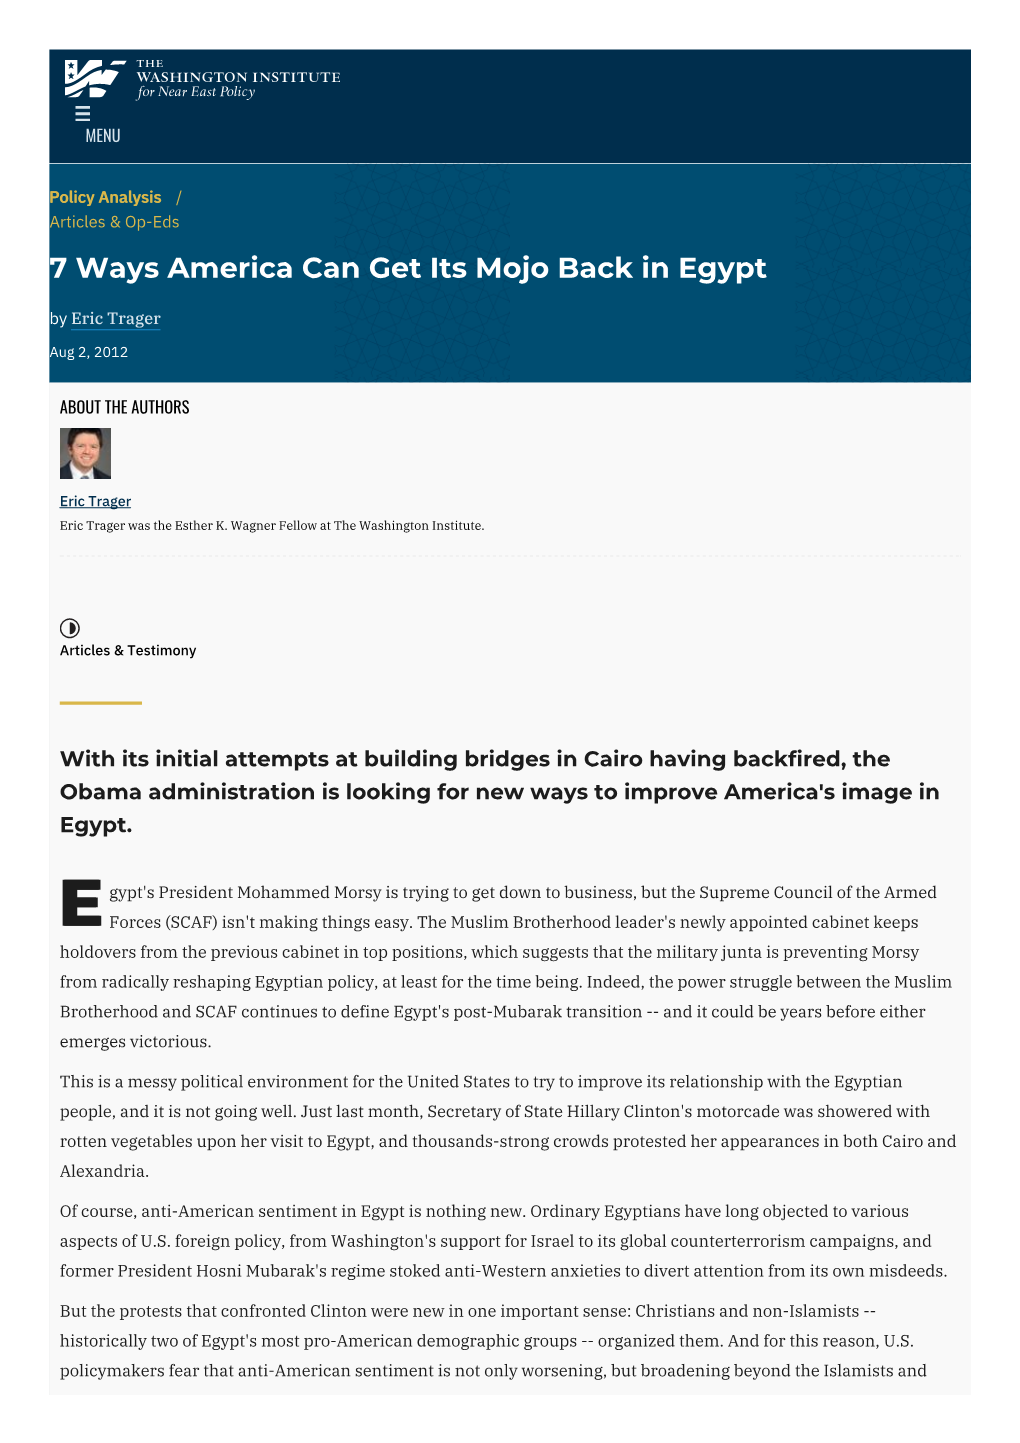 7 Ways America Can Get Its Mojo Back in Egypt by Eric Trager